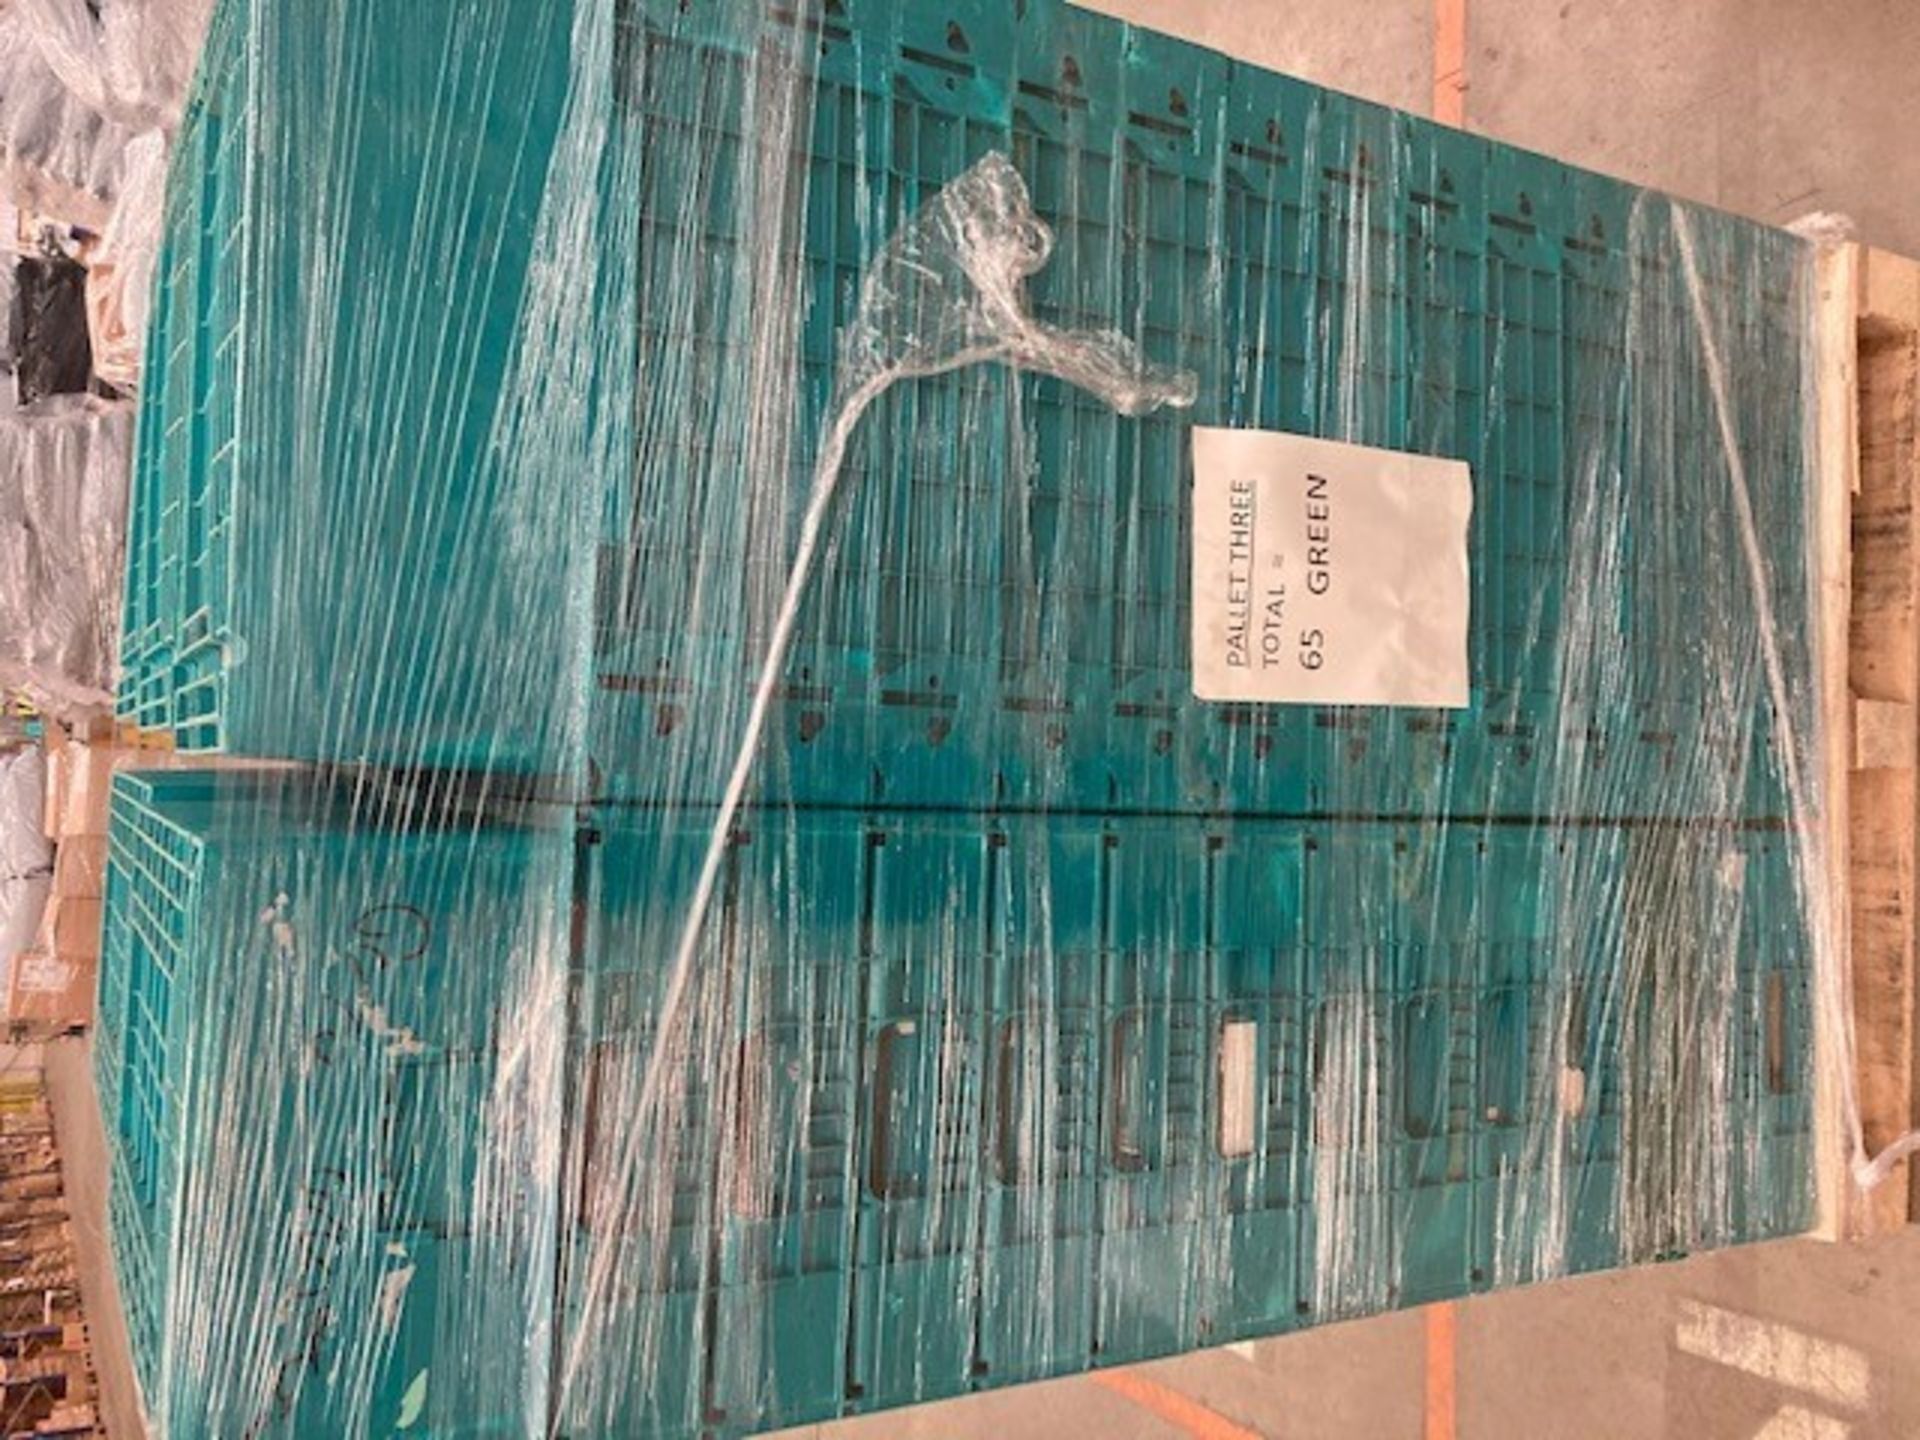 1 x Pallet of 65 Green Totes